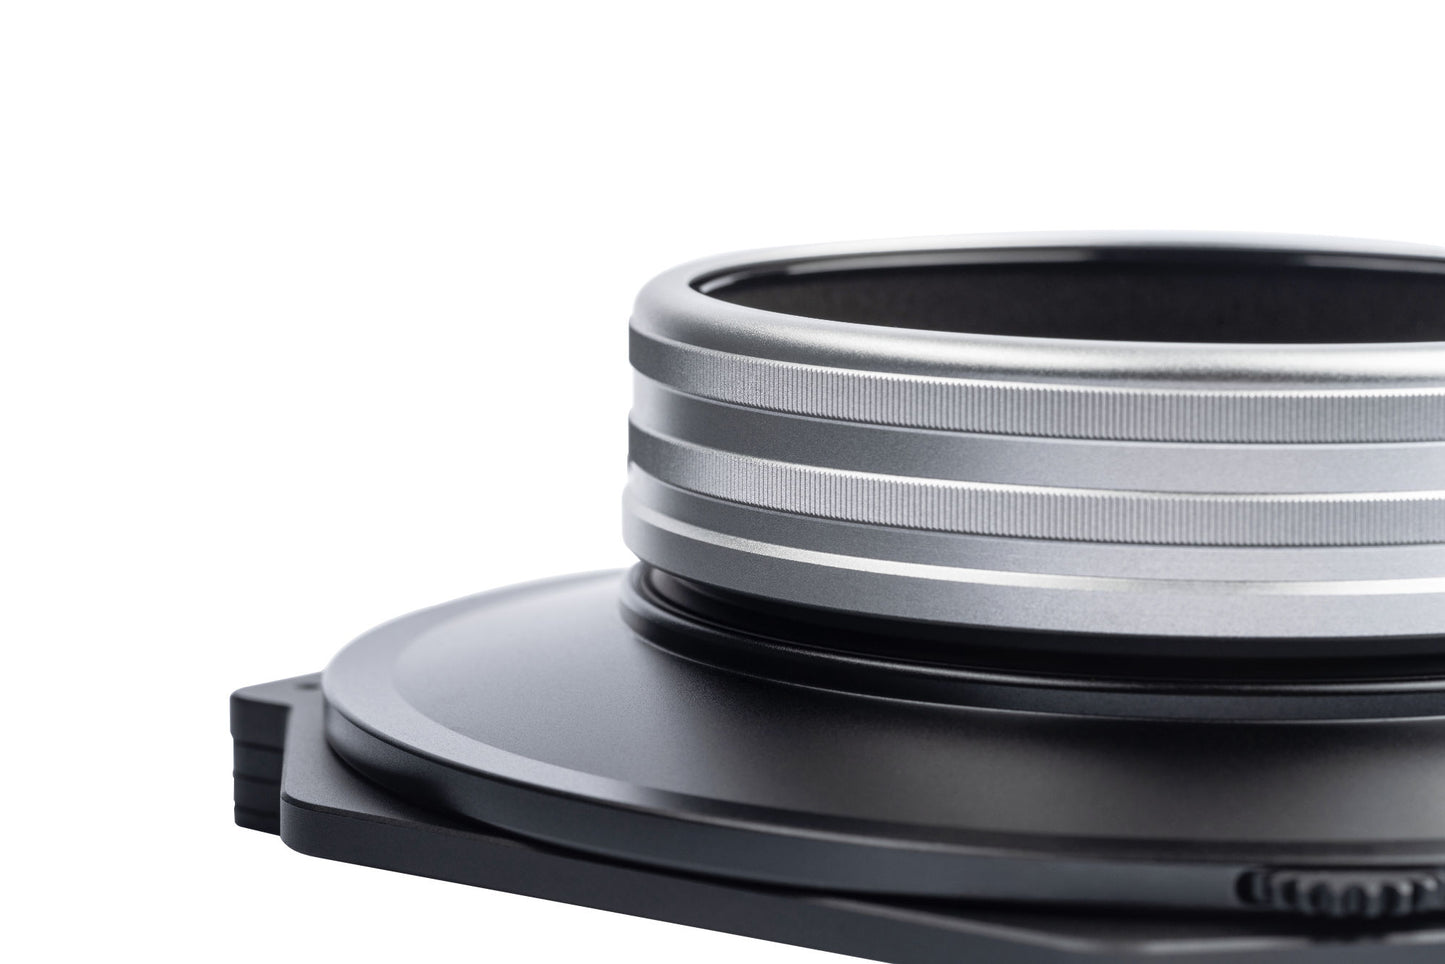 NiSi S6 150mm Filter Holder Kit with Pro CPL for Sony FE 12-24mm f/2.8 GM